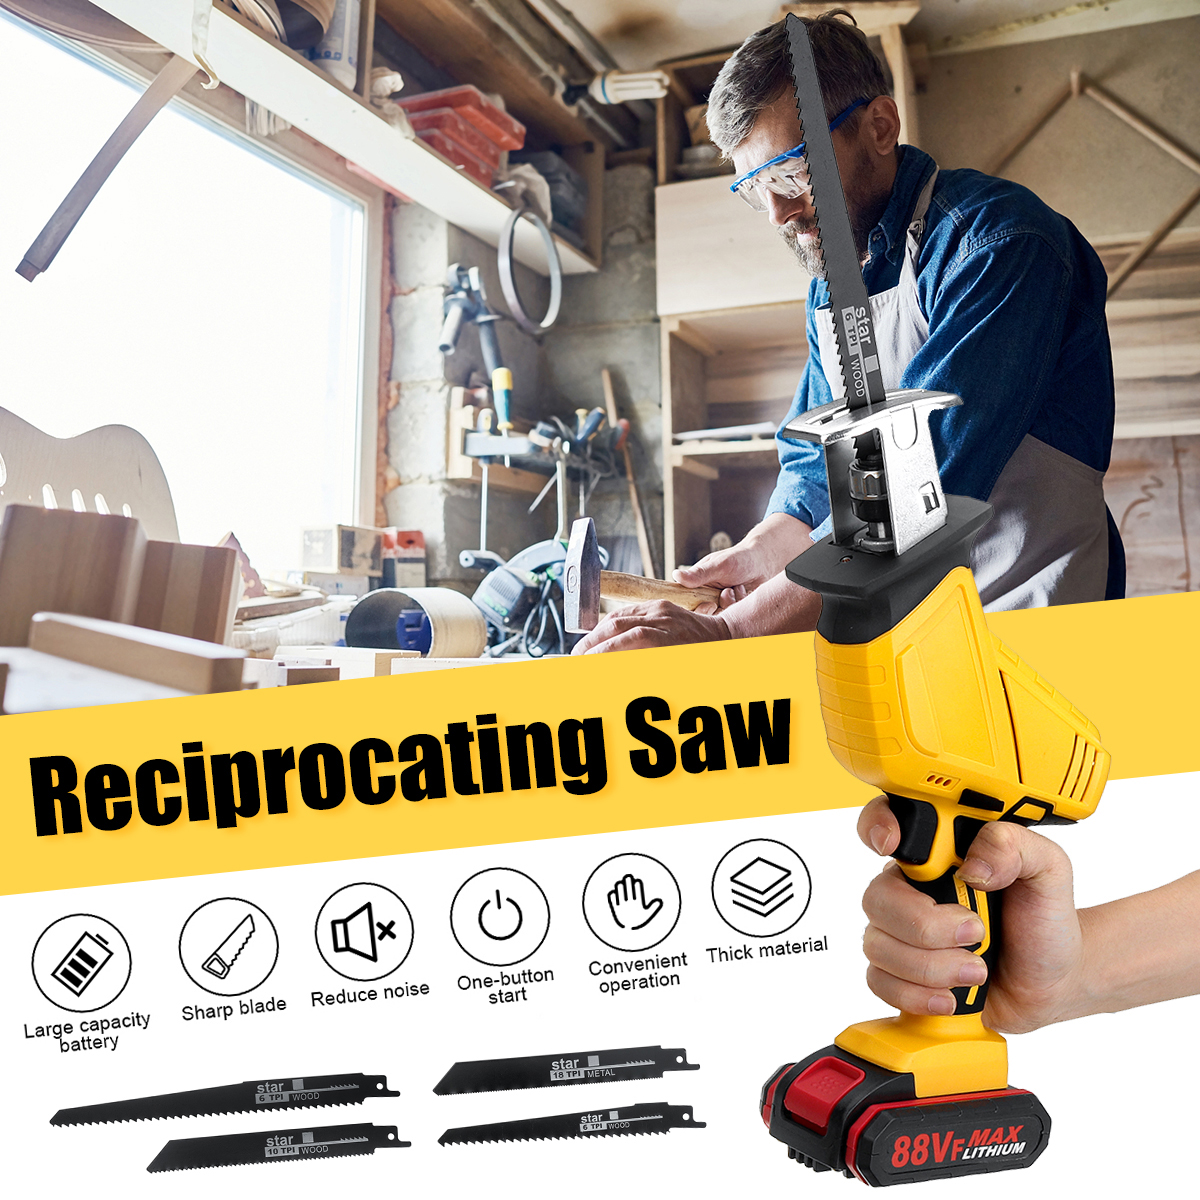 88VF-Cordless-Electric-Reciprocating-Saw-W-4-Blades--1or2-Battery-for-Worx-Woodworking-Wood-Cutting--1878507-2